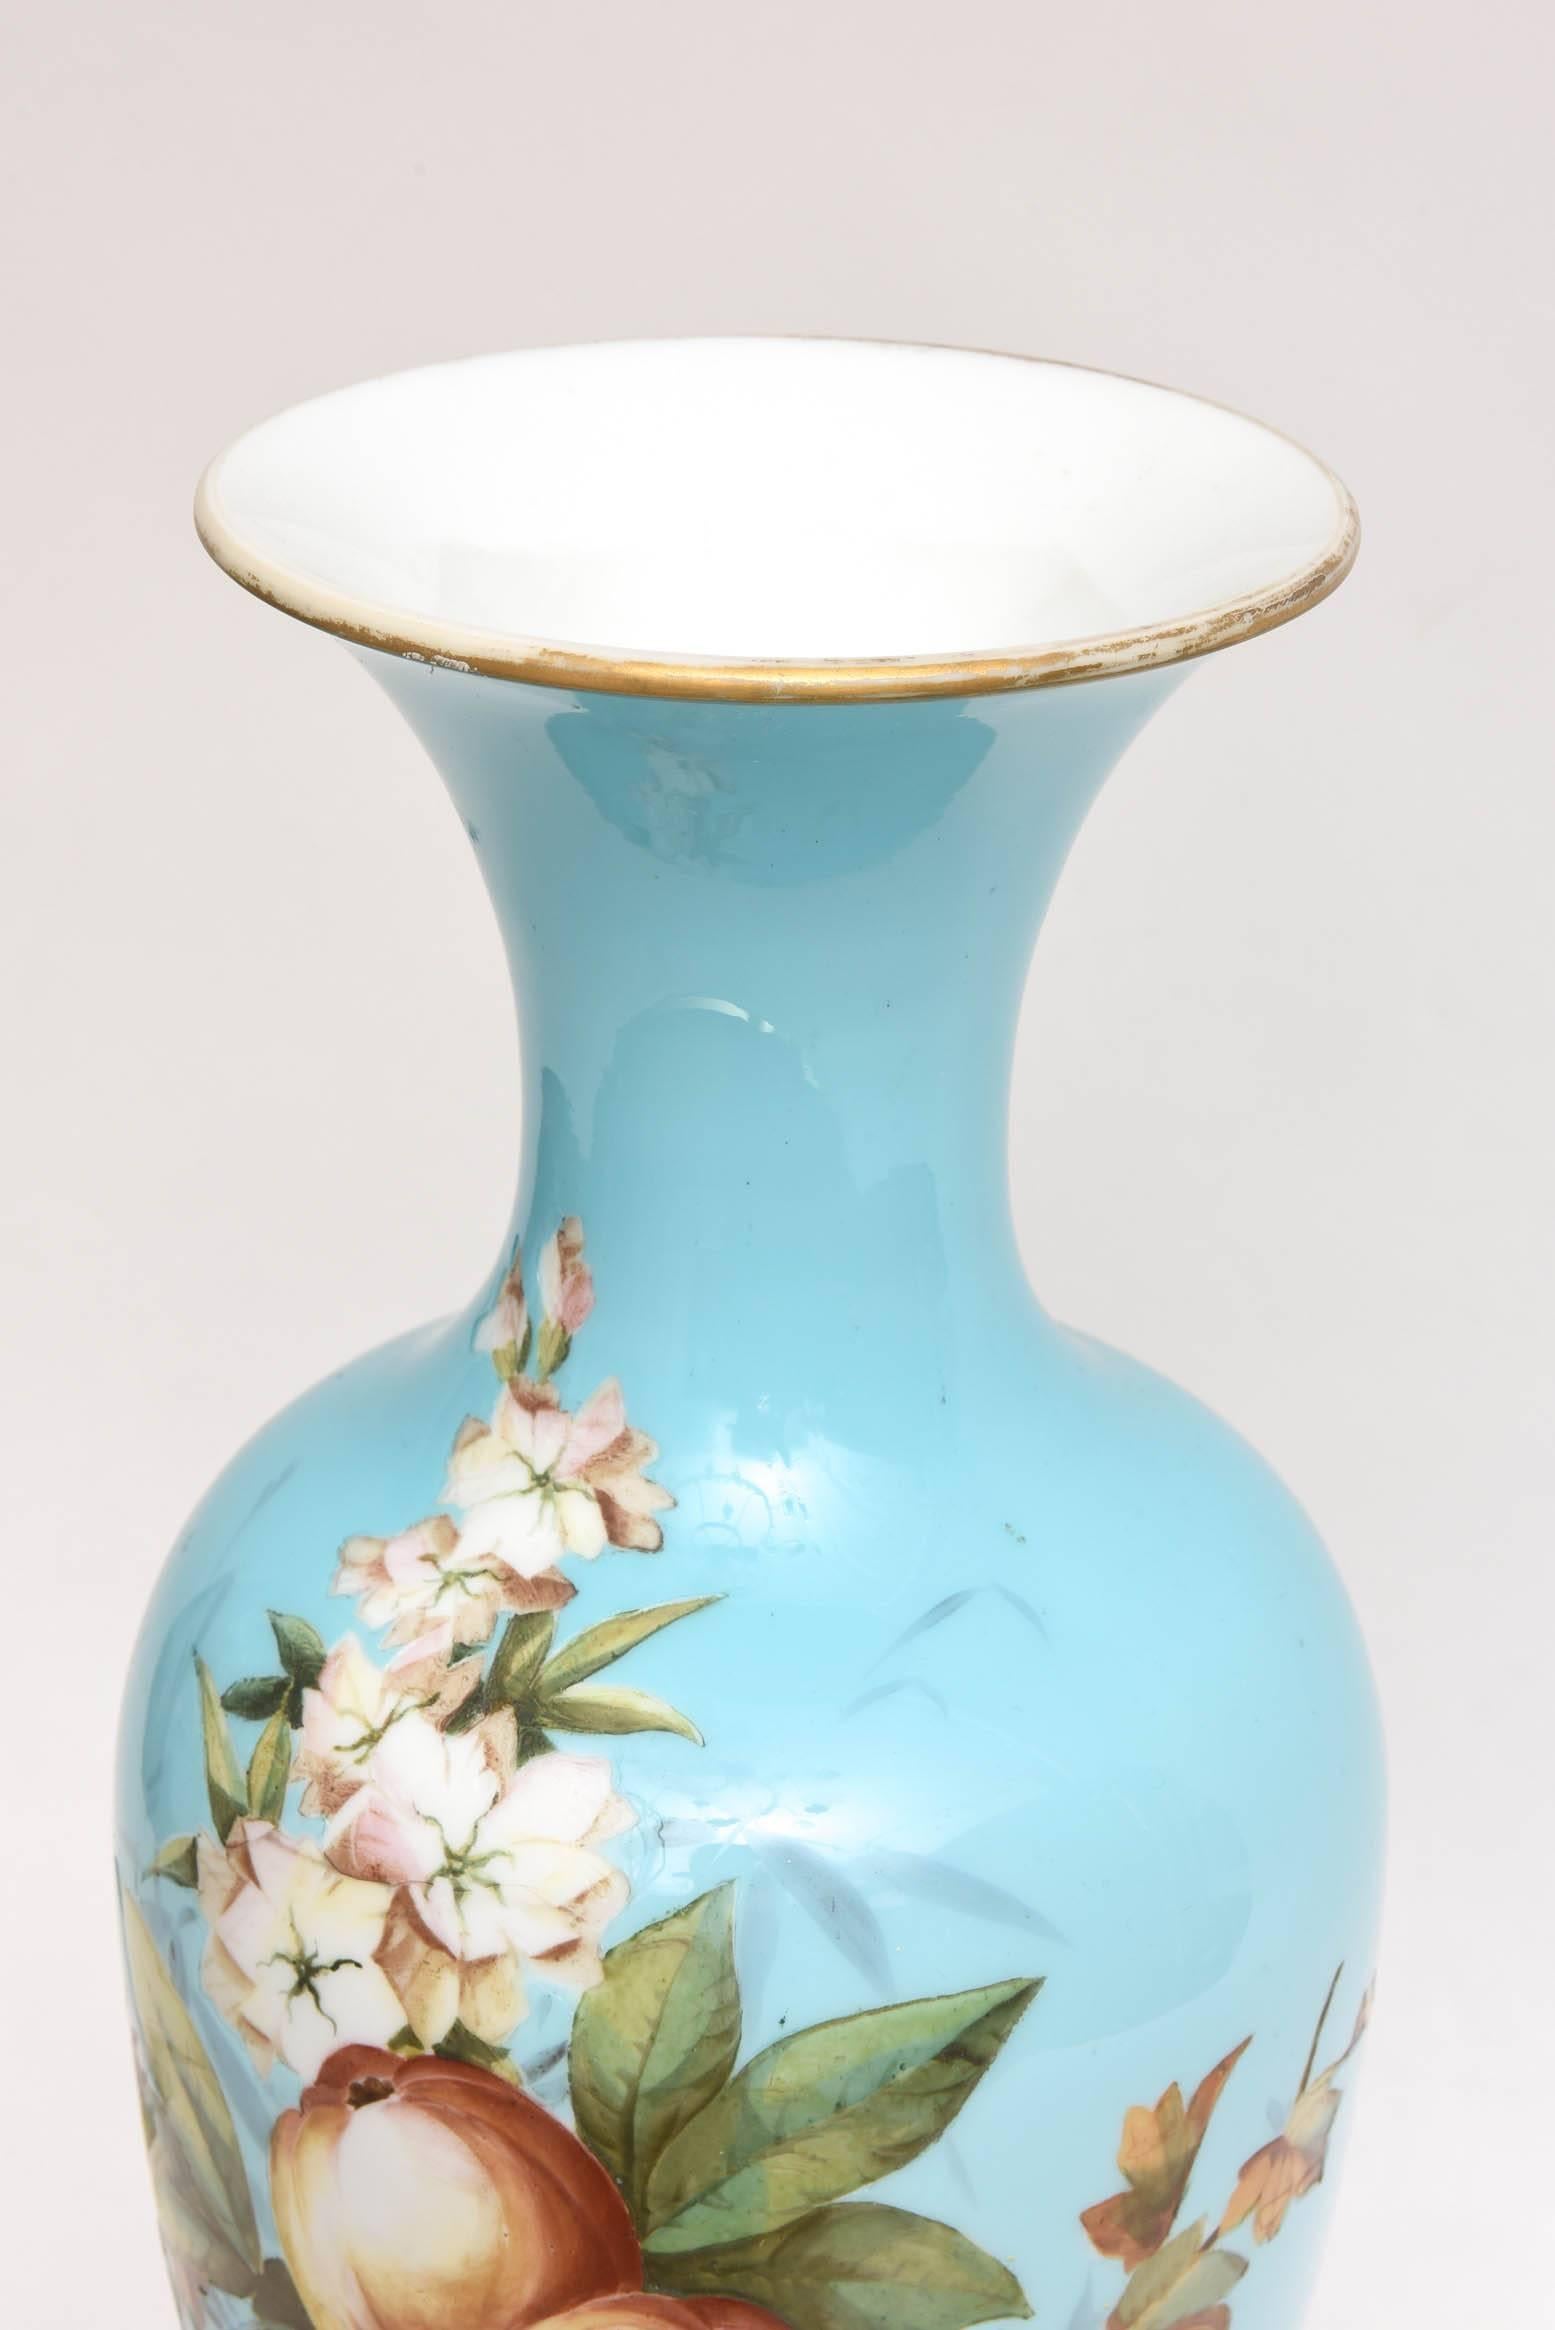 Hand-Crafted Tall Opaline Glass Vase with Hand-Painted Florals, Attributed to Baccarat